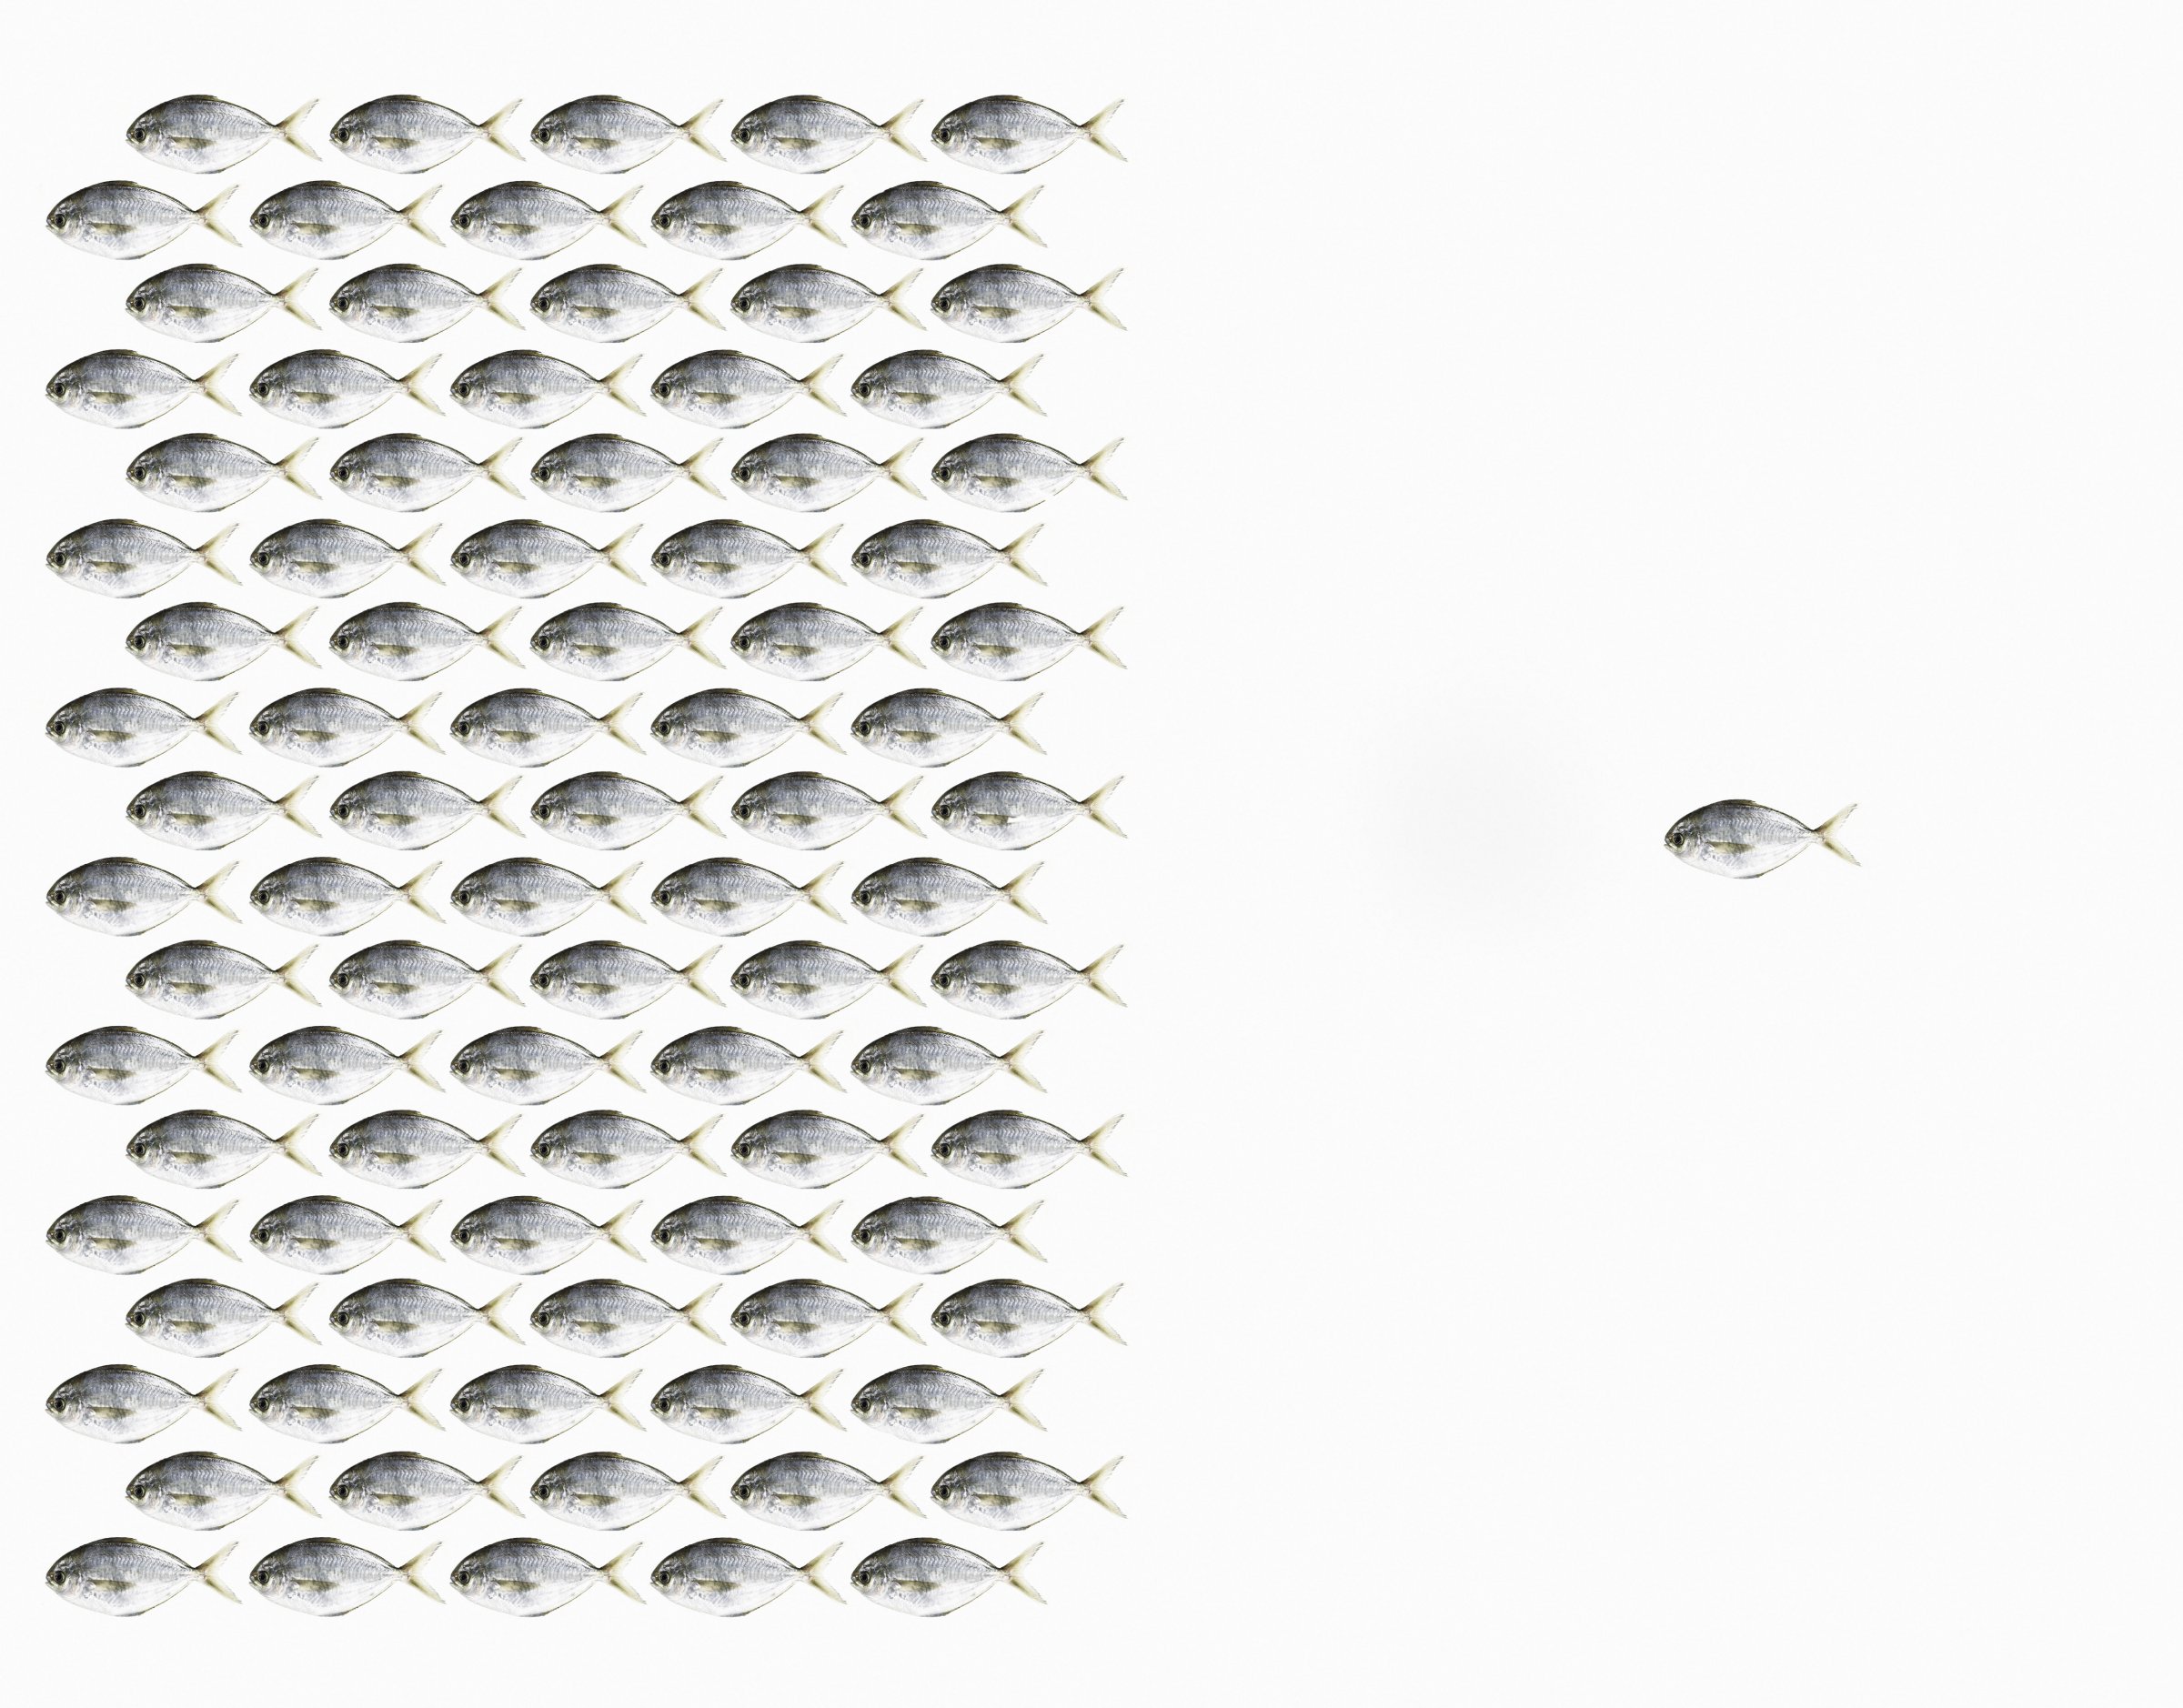 One Fish Following a Group of Fish.